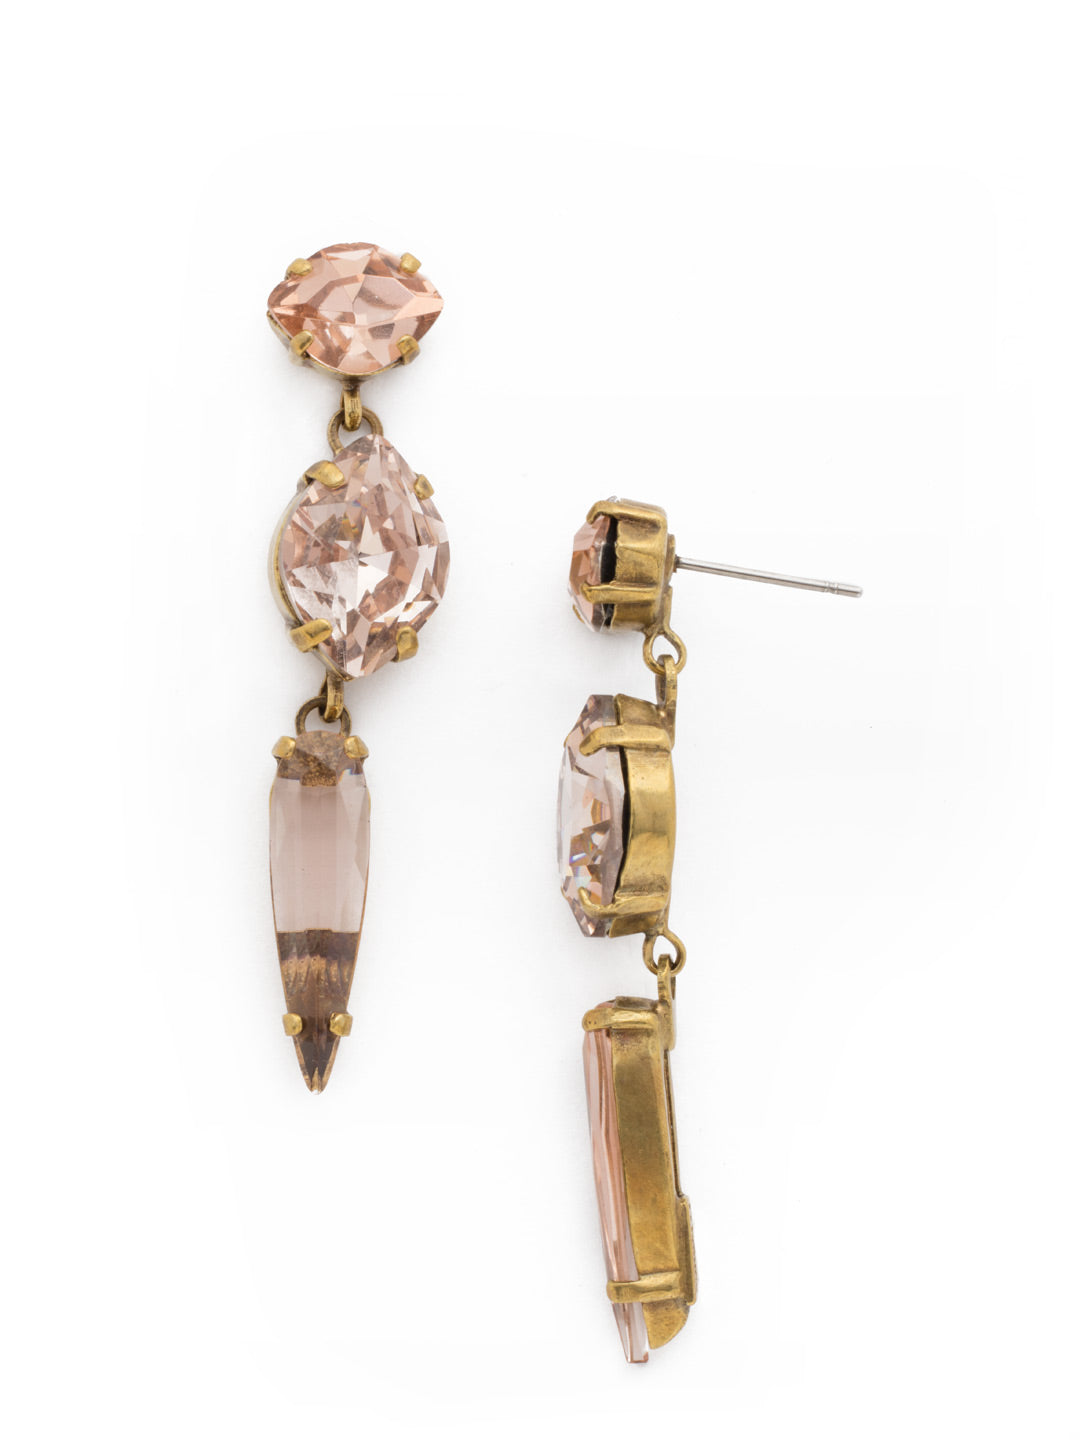 Crystal Spiked Dangle Earrings - EDK55AGAP - This one-of-a-kind style is available for a limited time only! From Sorrelli's Apricot Agate collection in our Antique Gold-tone finish.